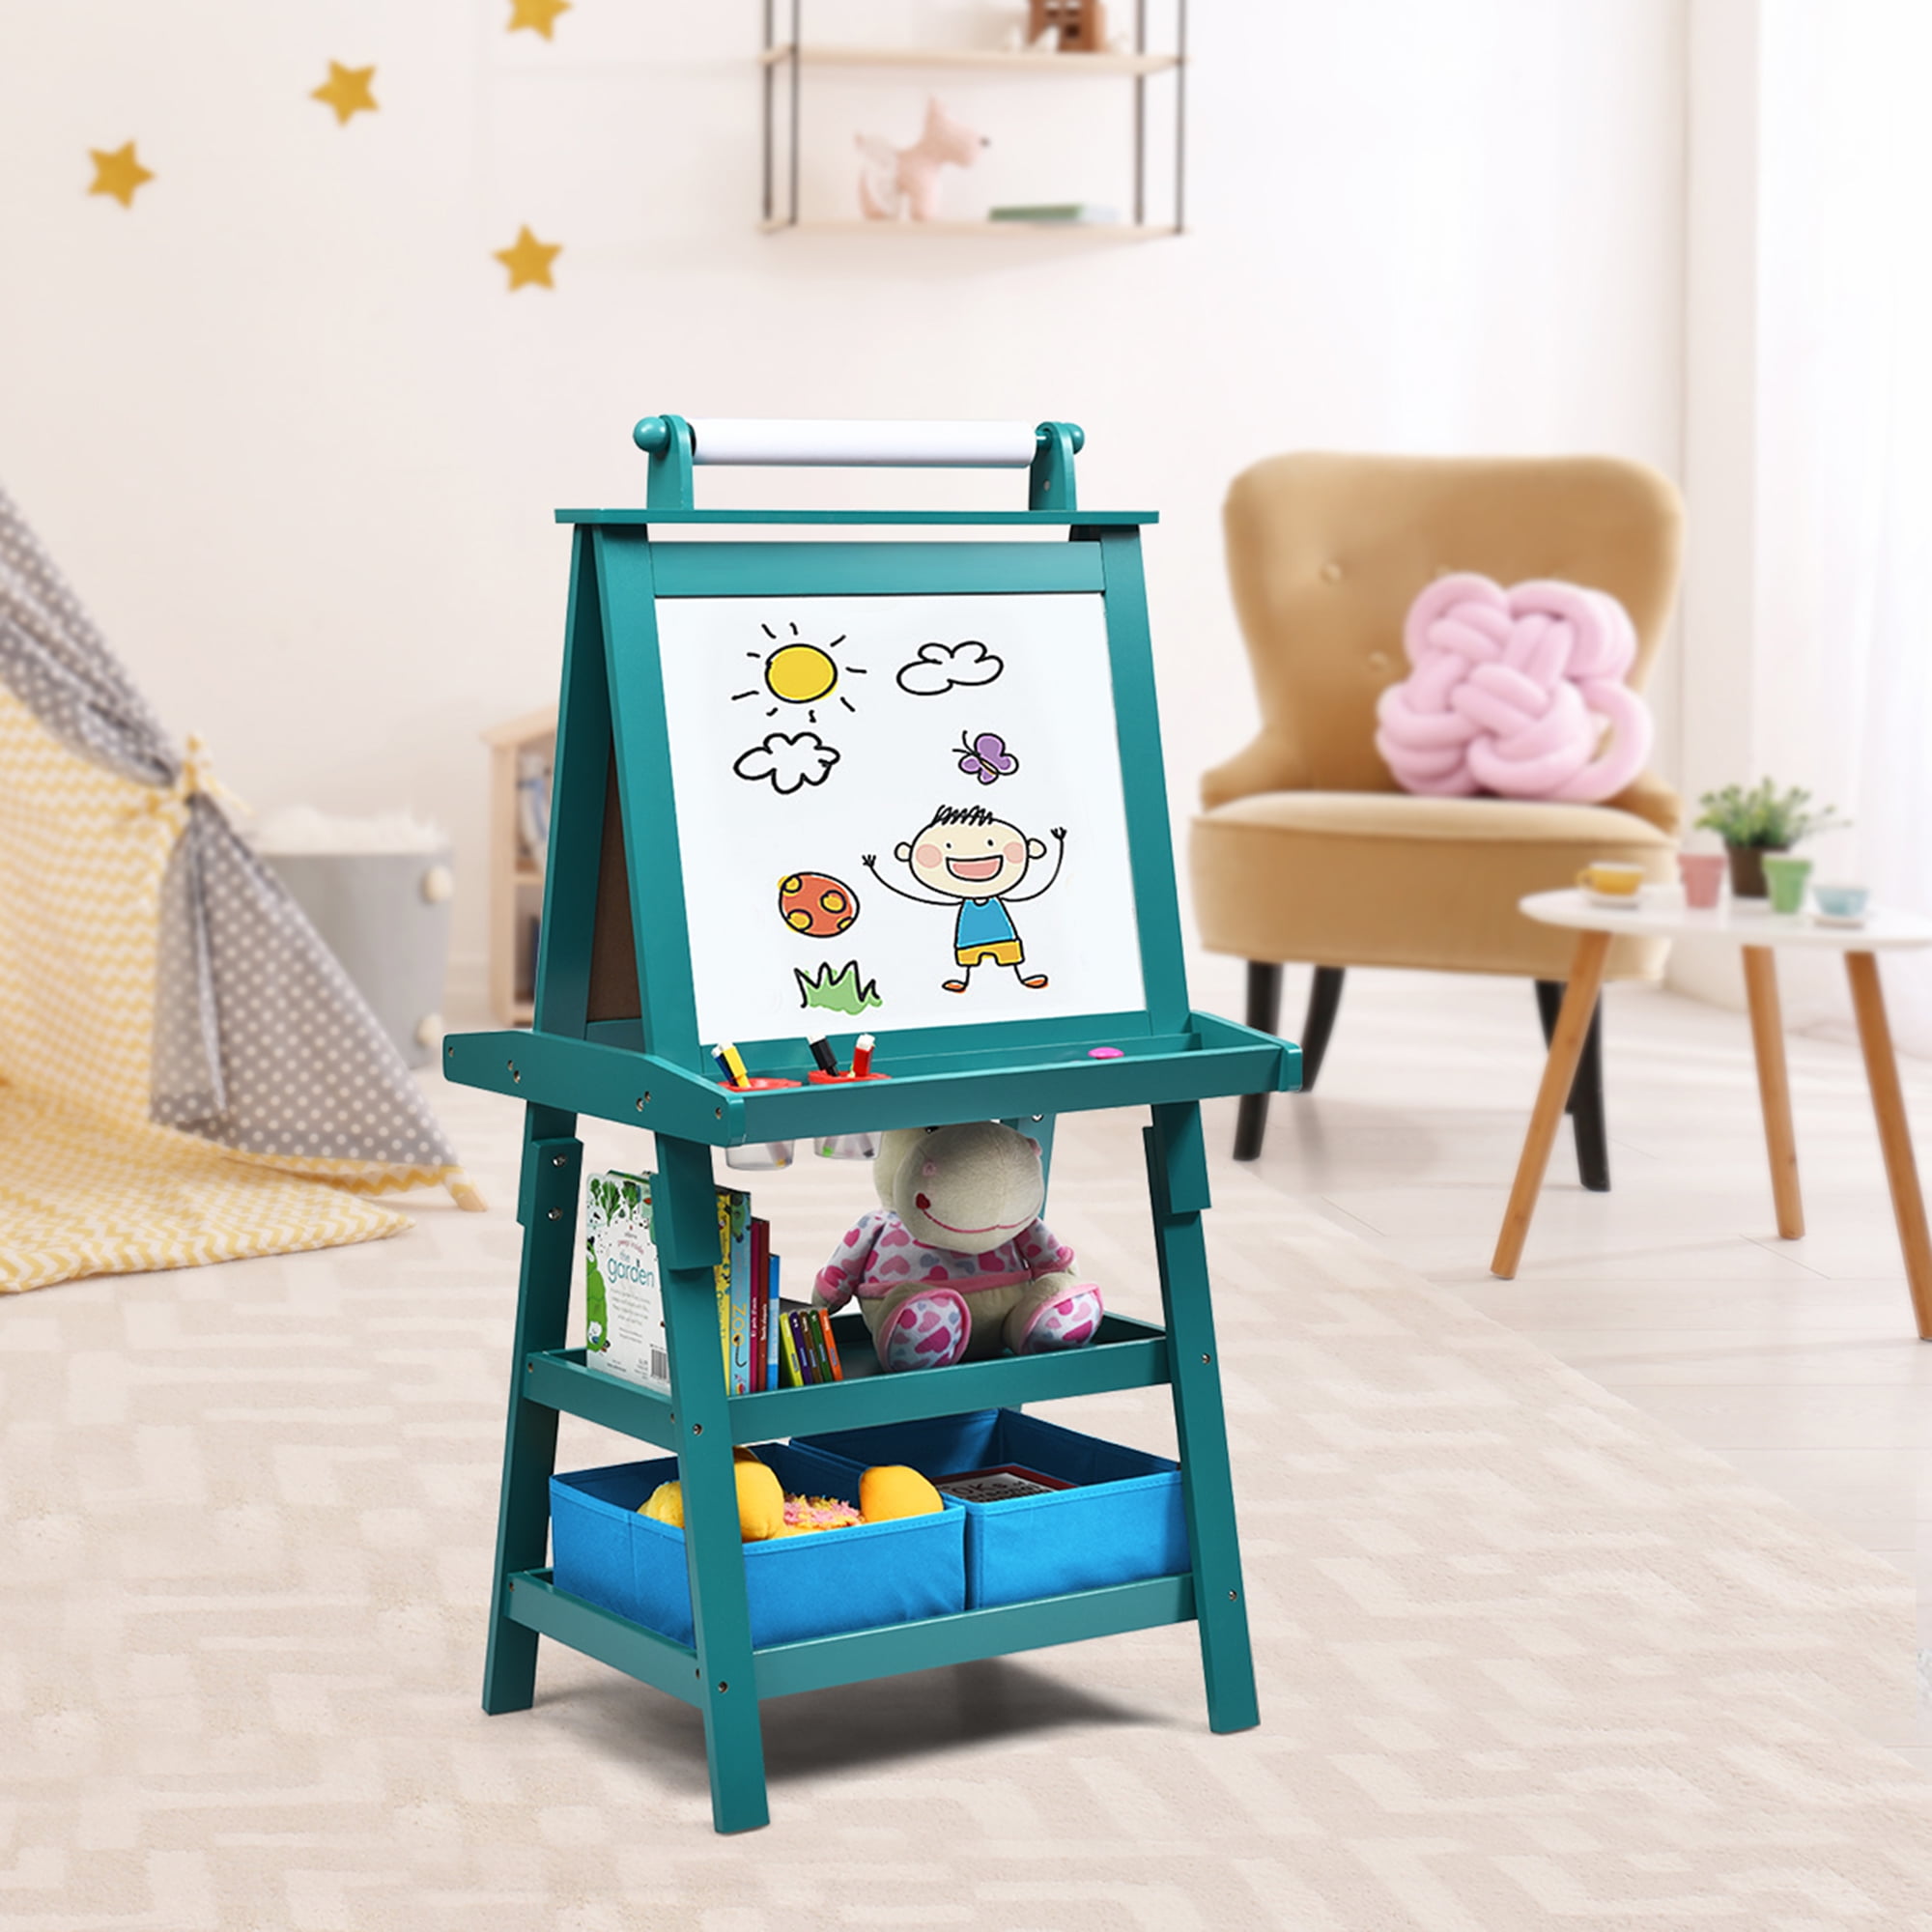 HOMCOM 3 In 1 Kid's Wooden Art Easel with Dual-Sides and Storage Baske –